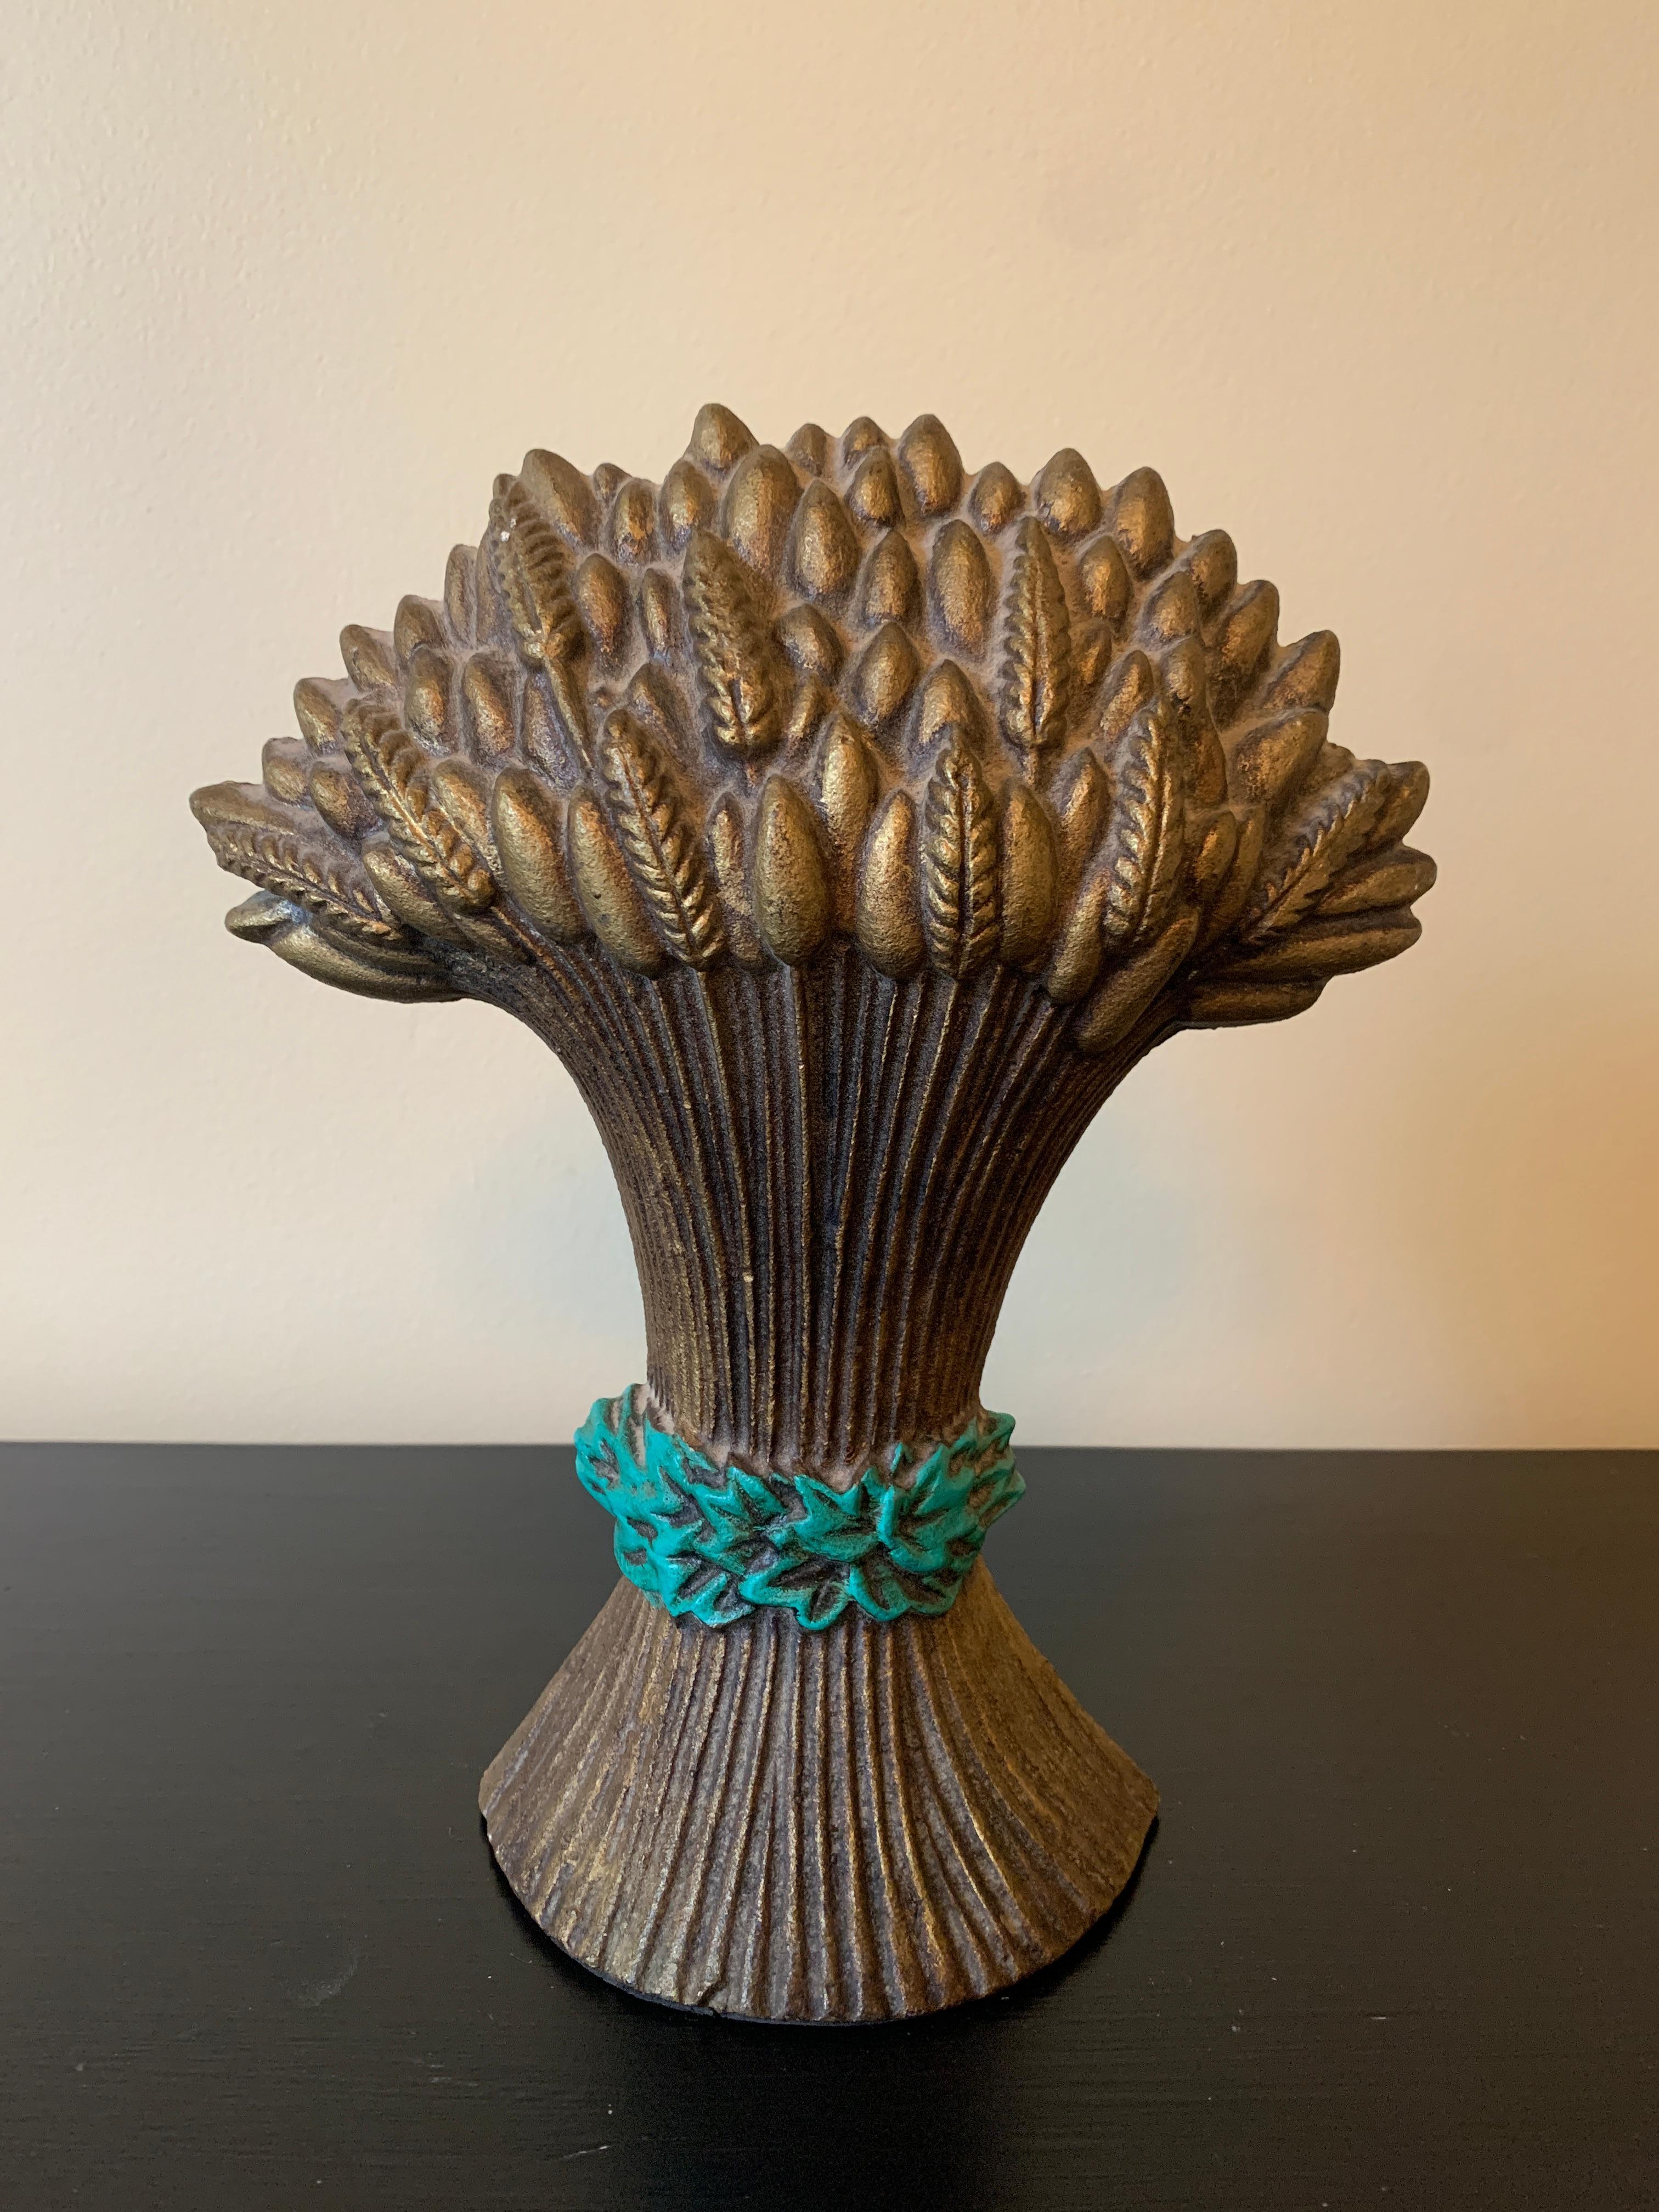 A beautiful antique Victorian cast iron sheaf of wheat door stop

USA, Late 19th Century

Measures: 7.5